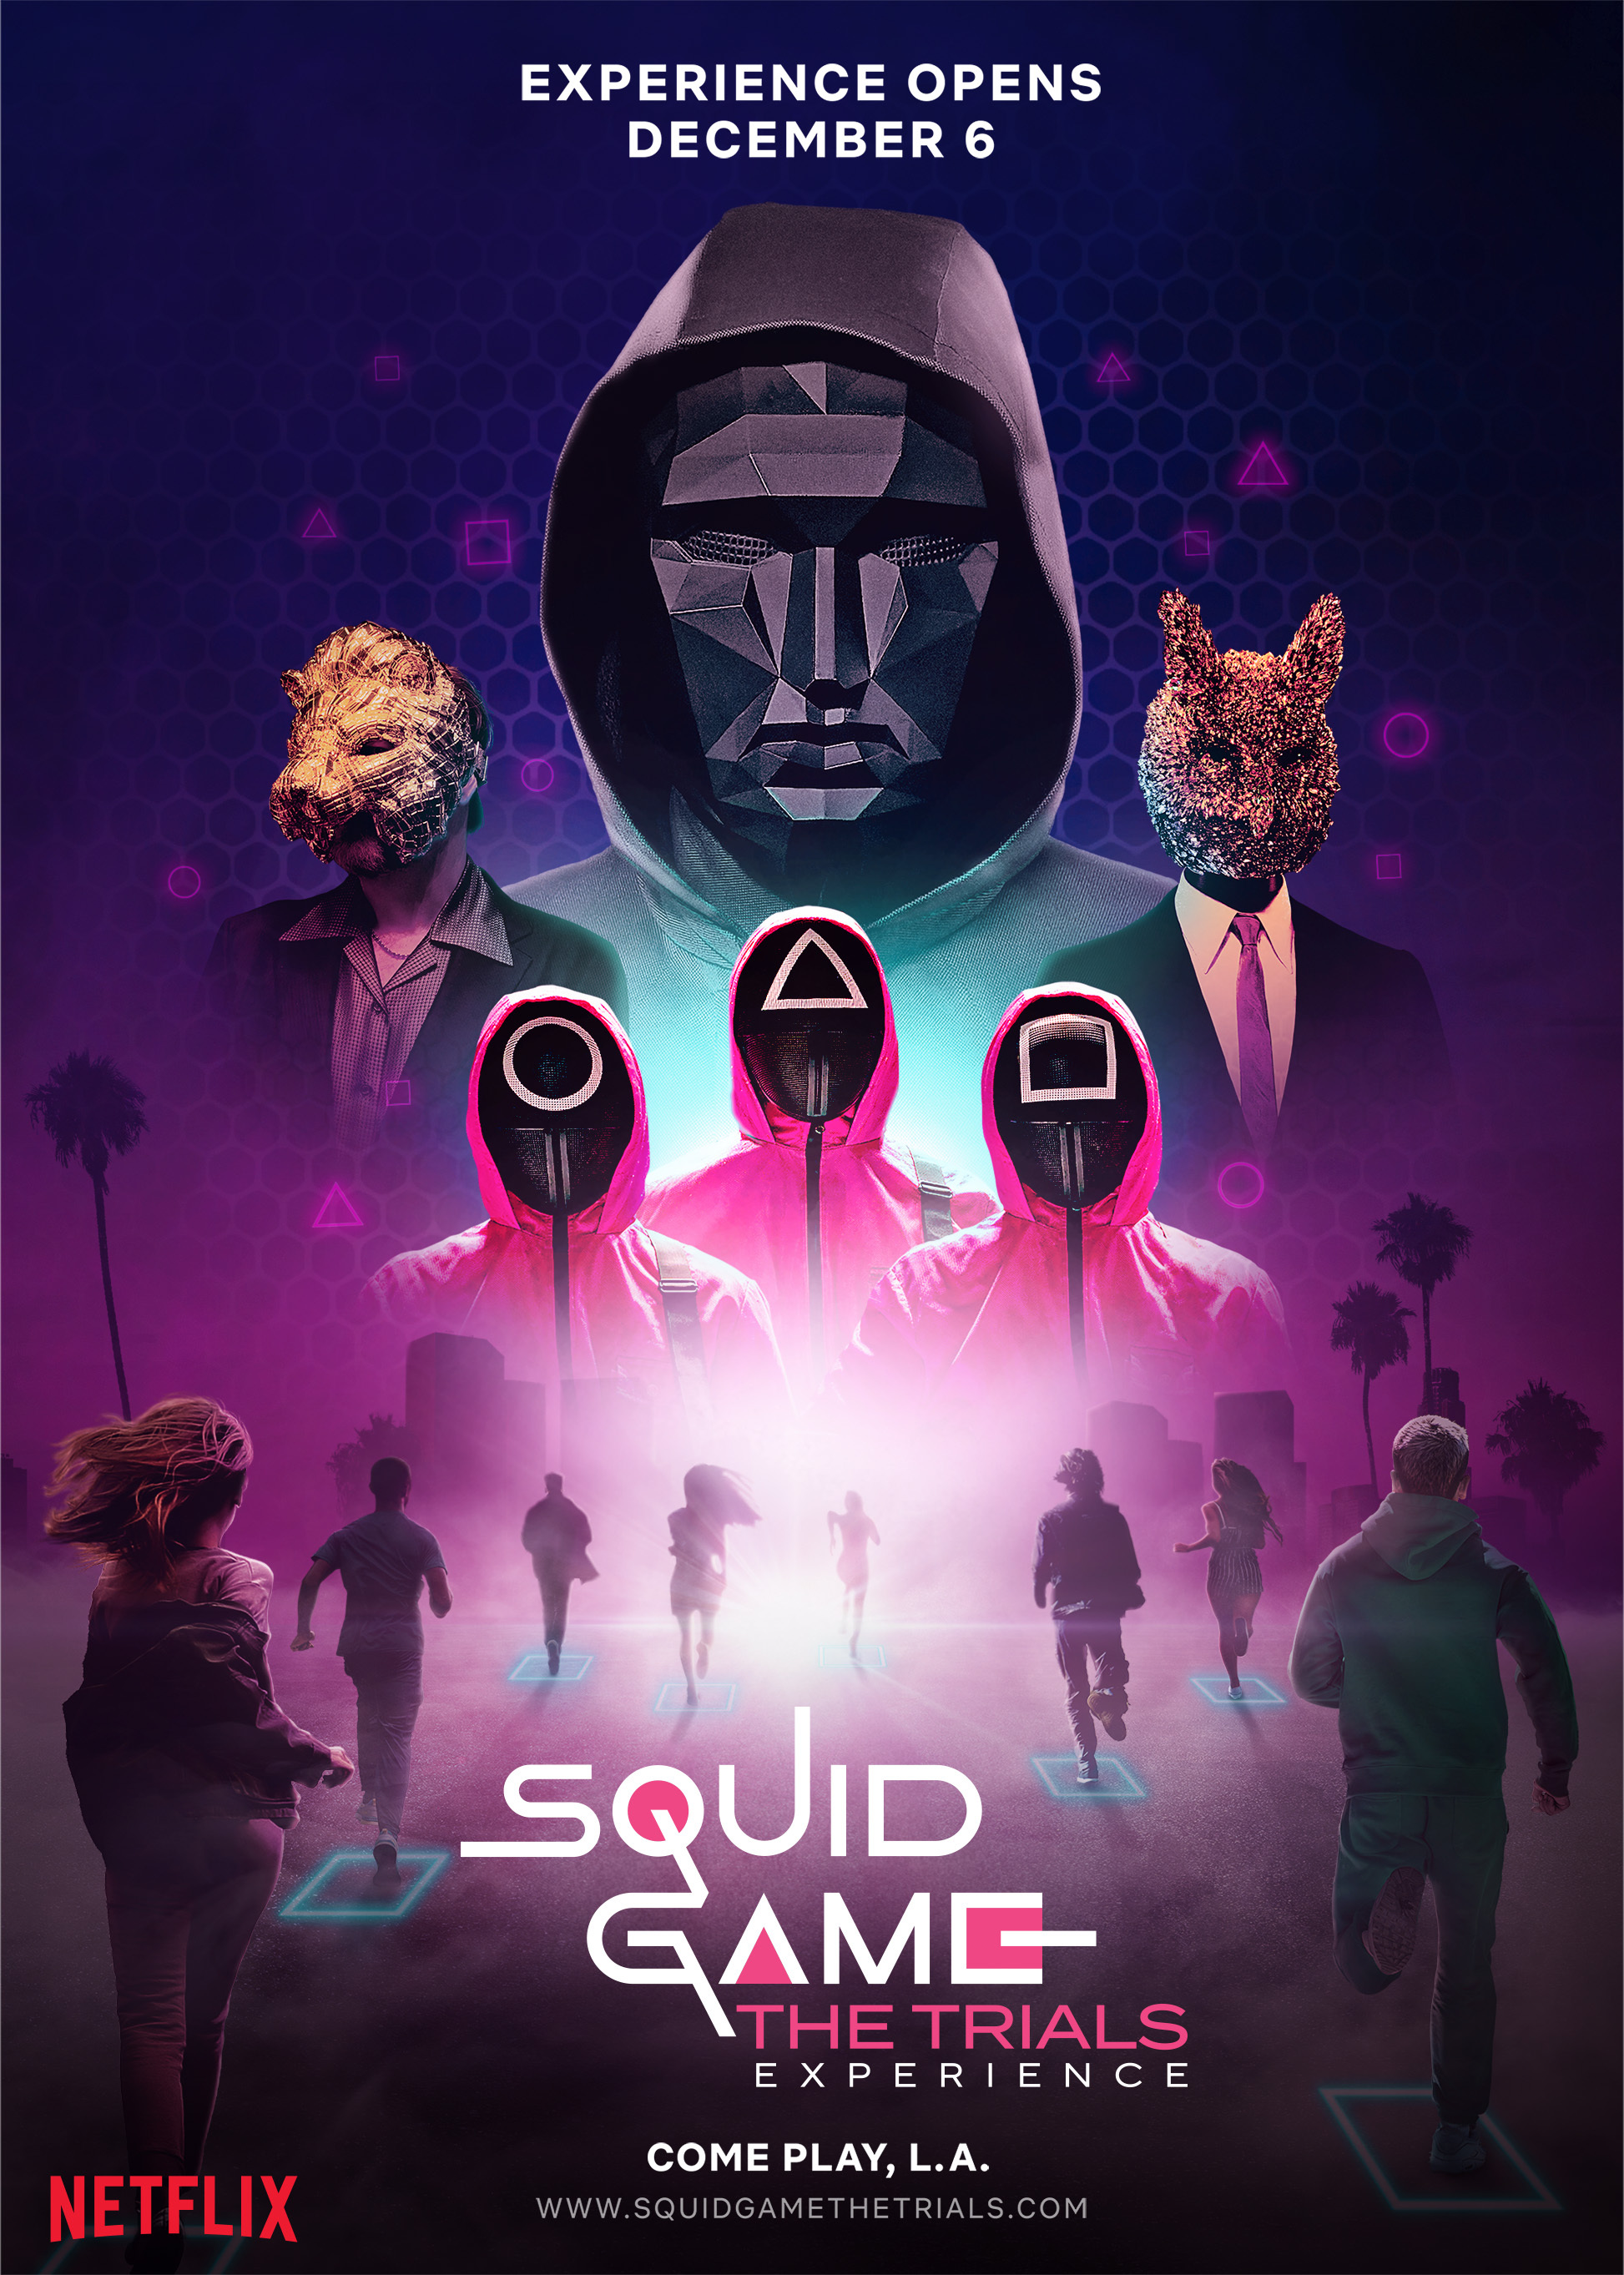 Squid games The trial experience poster that leads to official page